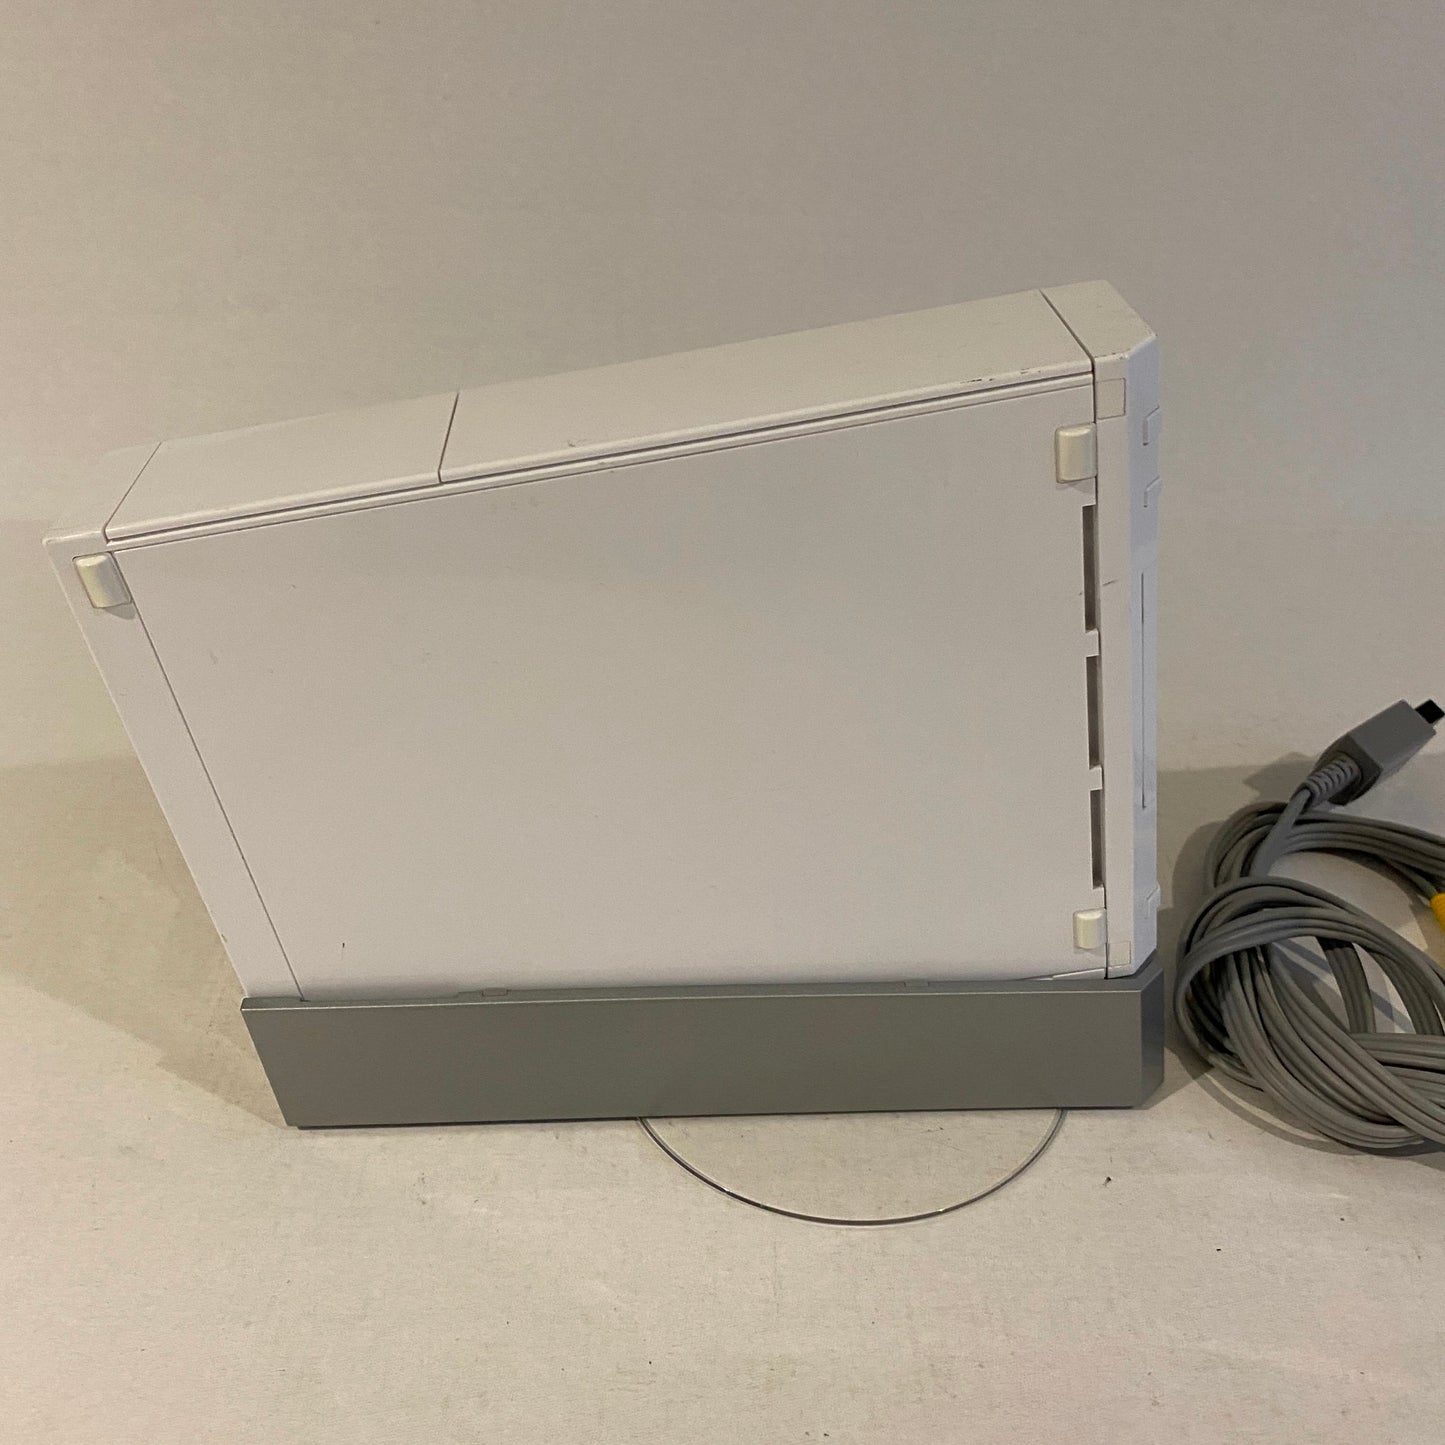 Nintendo Wii Console and A/V Cable -  RVL-001